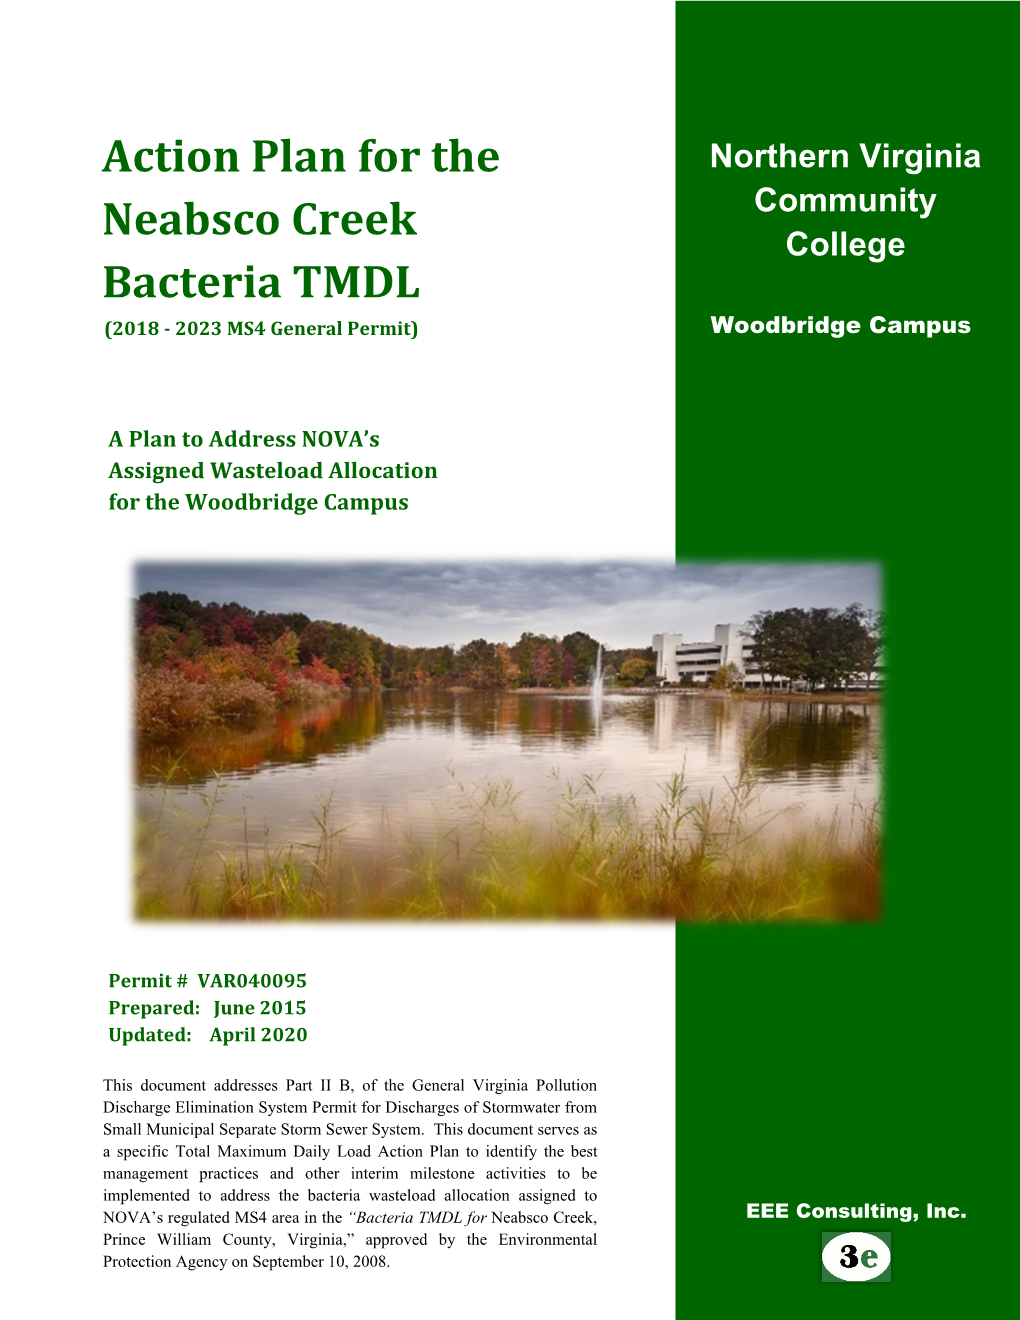 Action Plan for the Neabsco Creek Bacteria TMDL